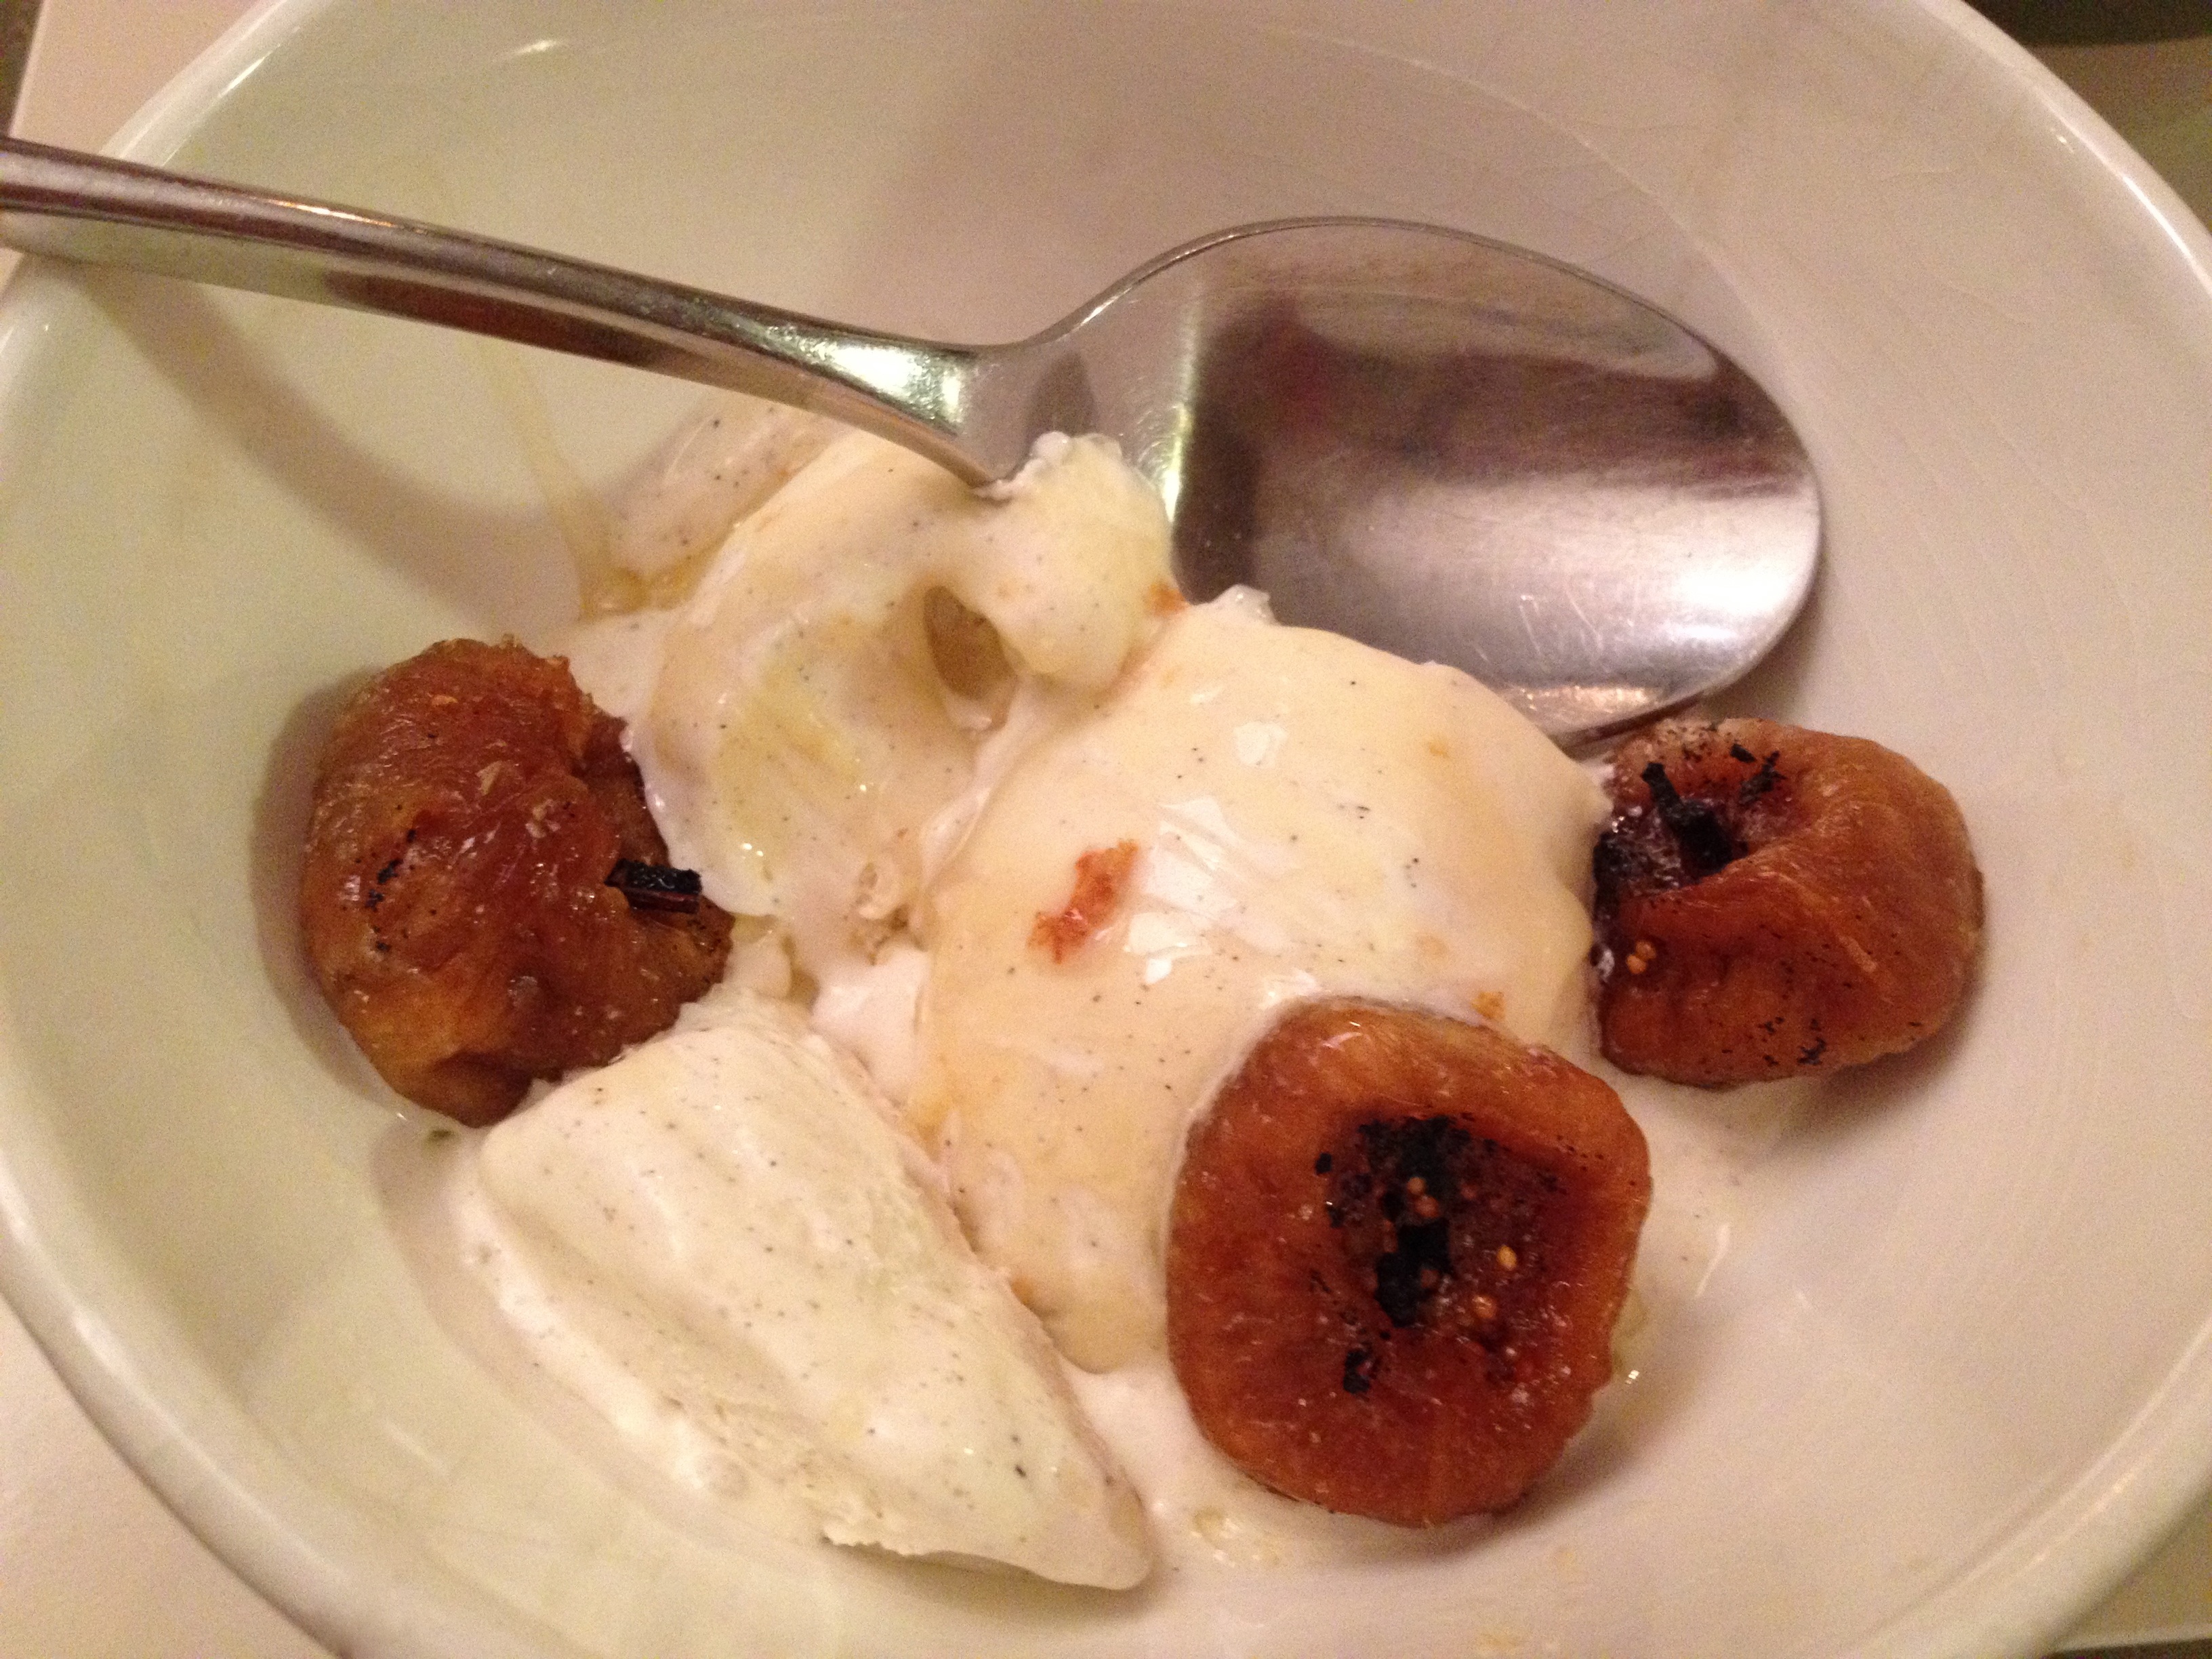 Ice cream and sauteed figs in a white bowl.